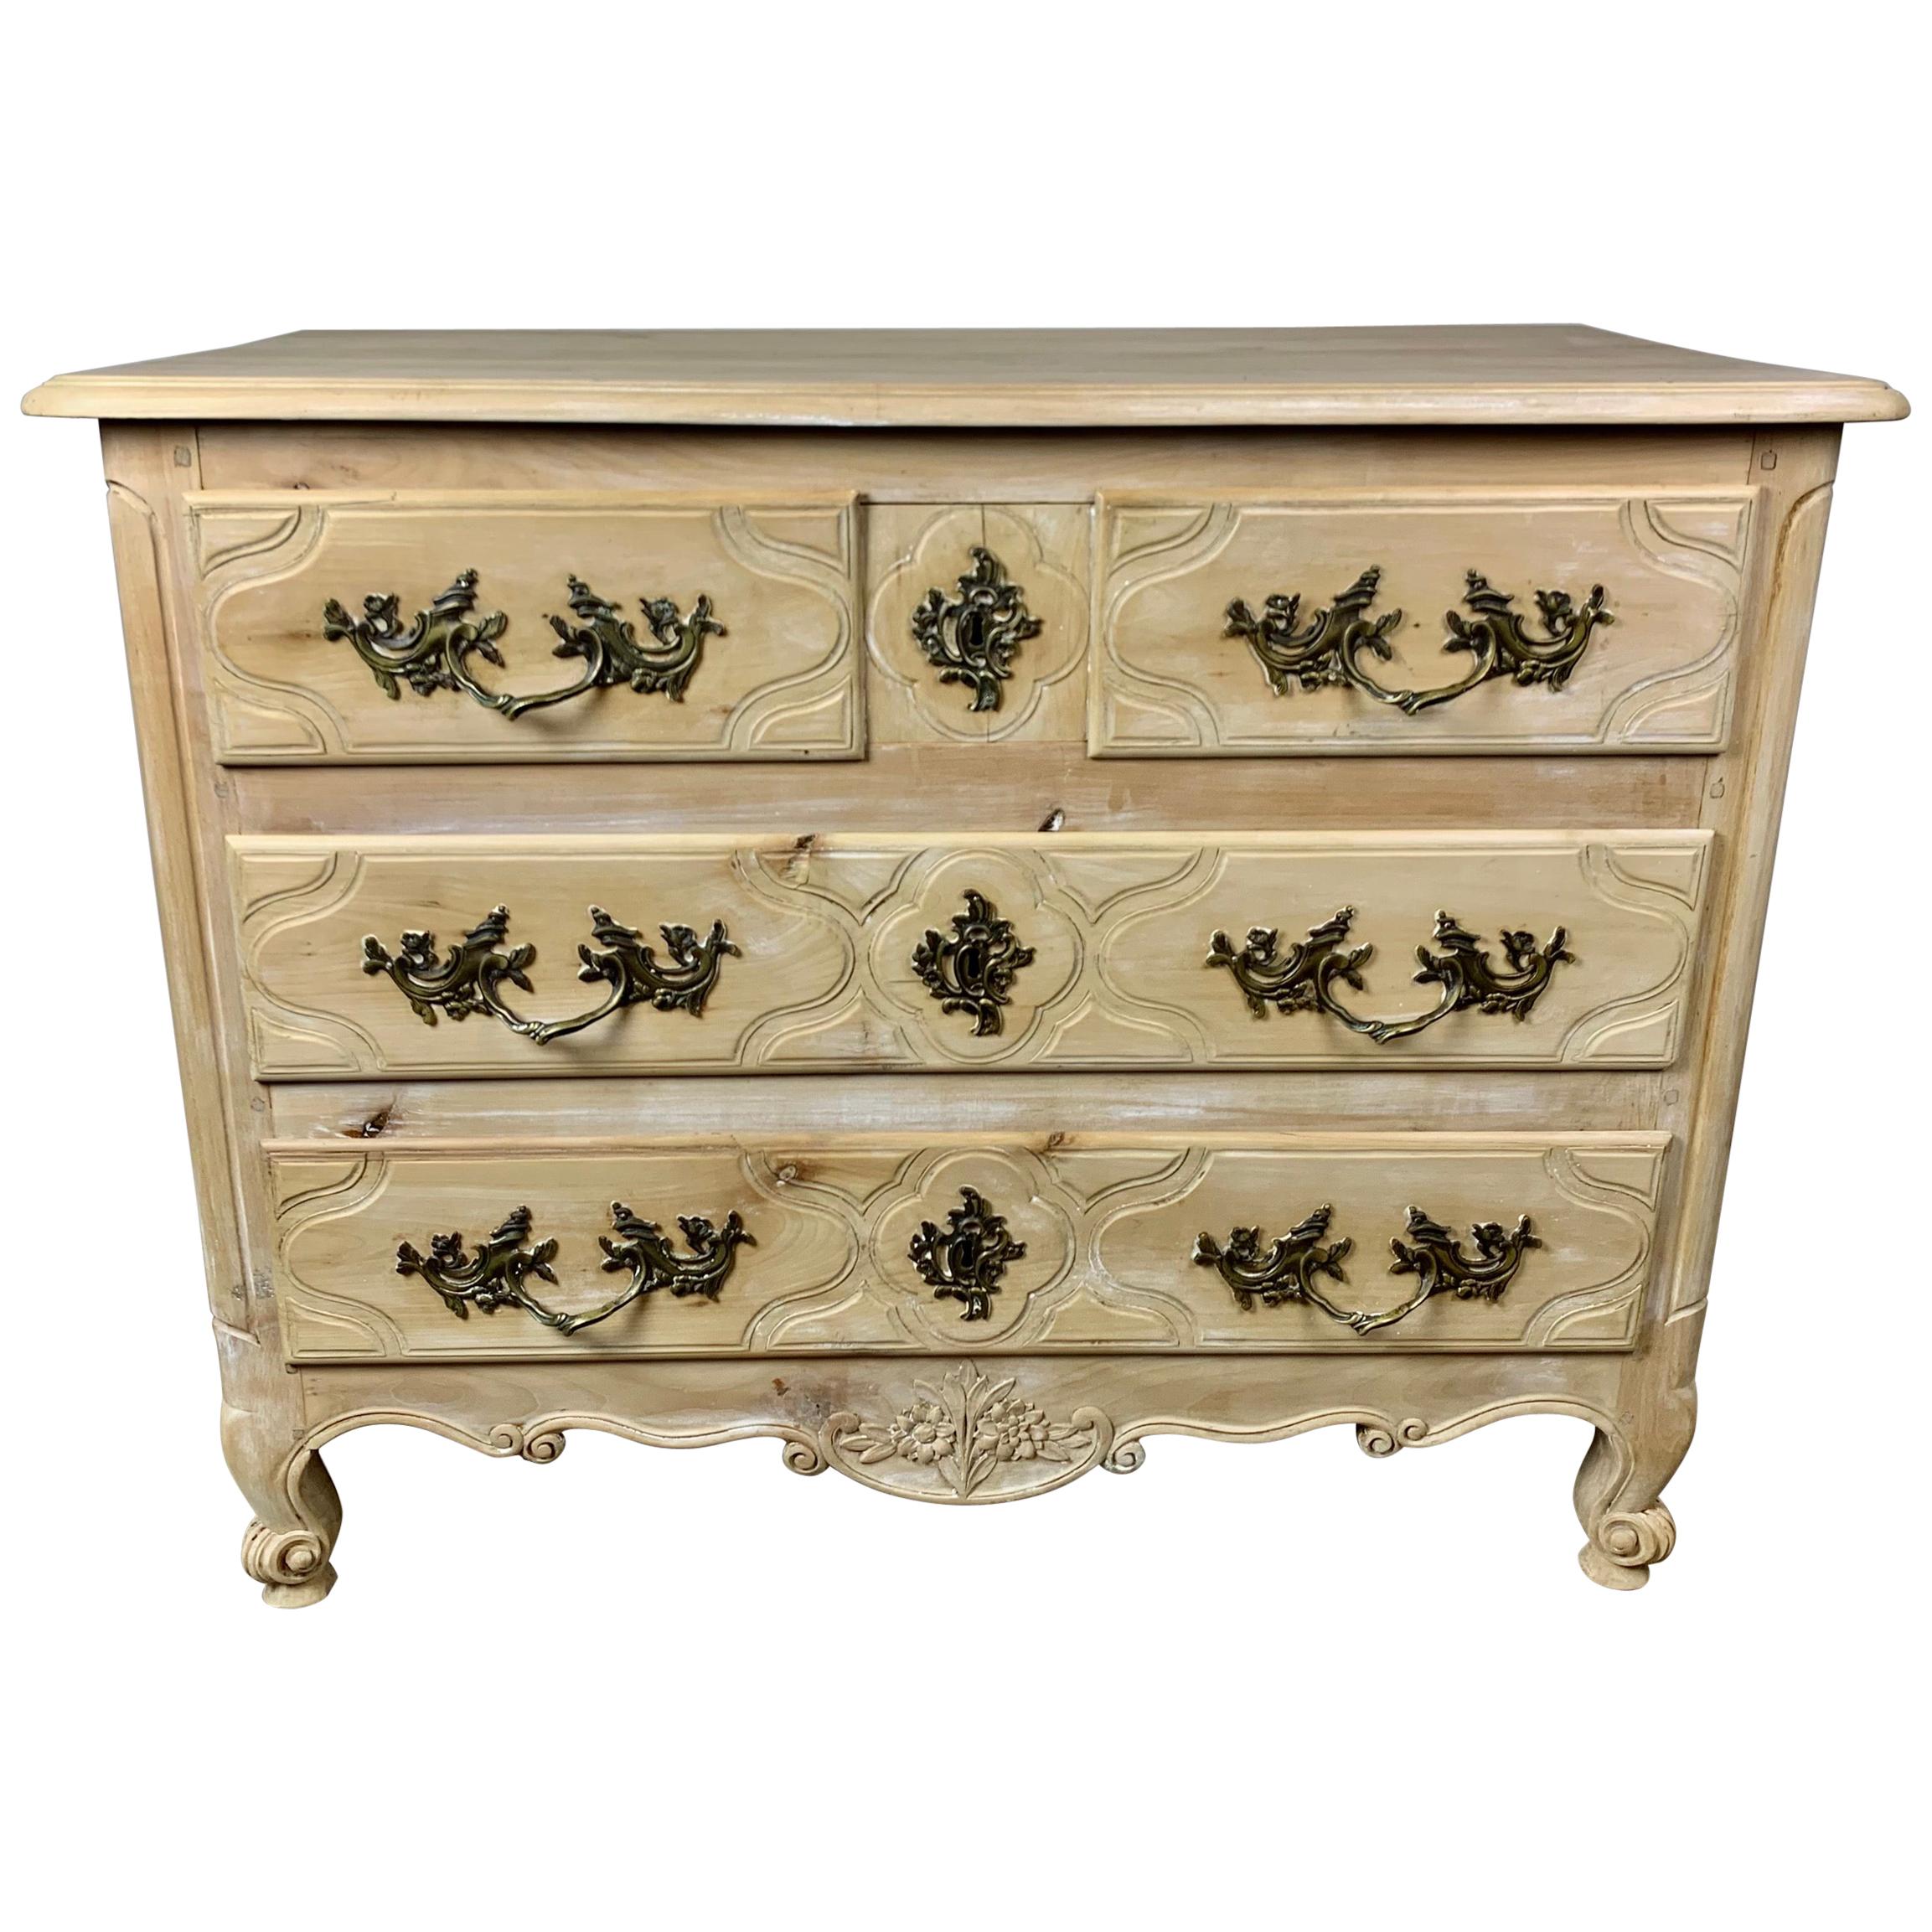 French Chest of Drawers, circa 1900